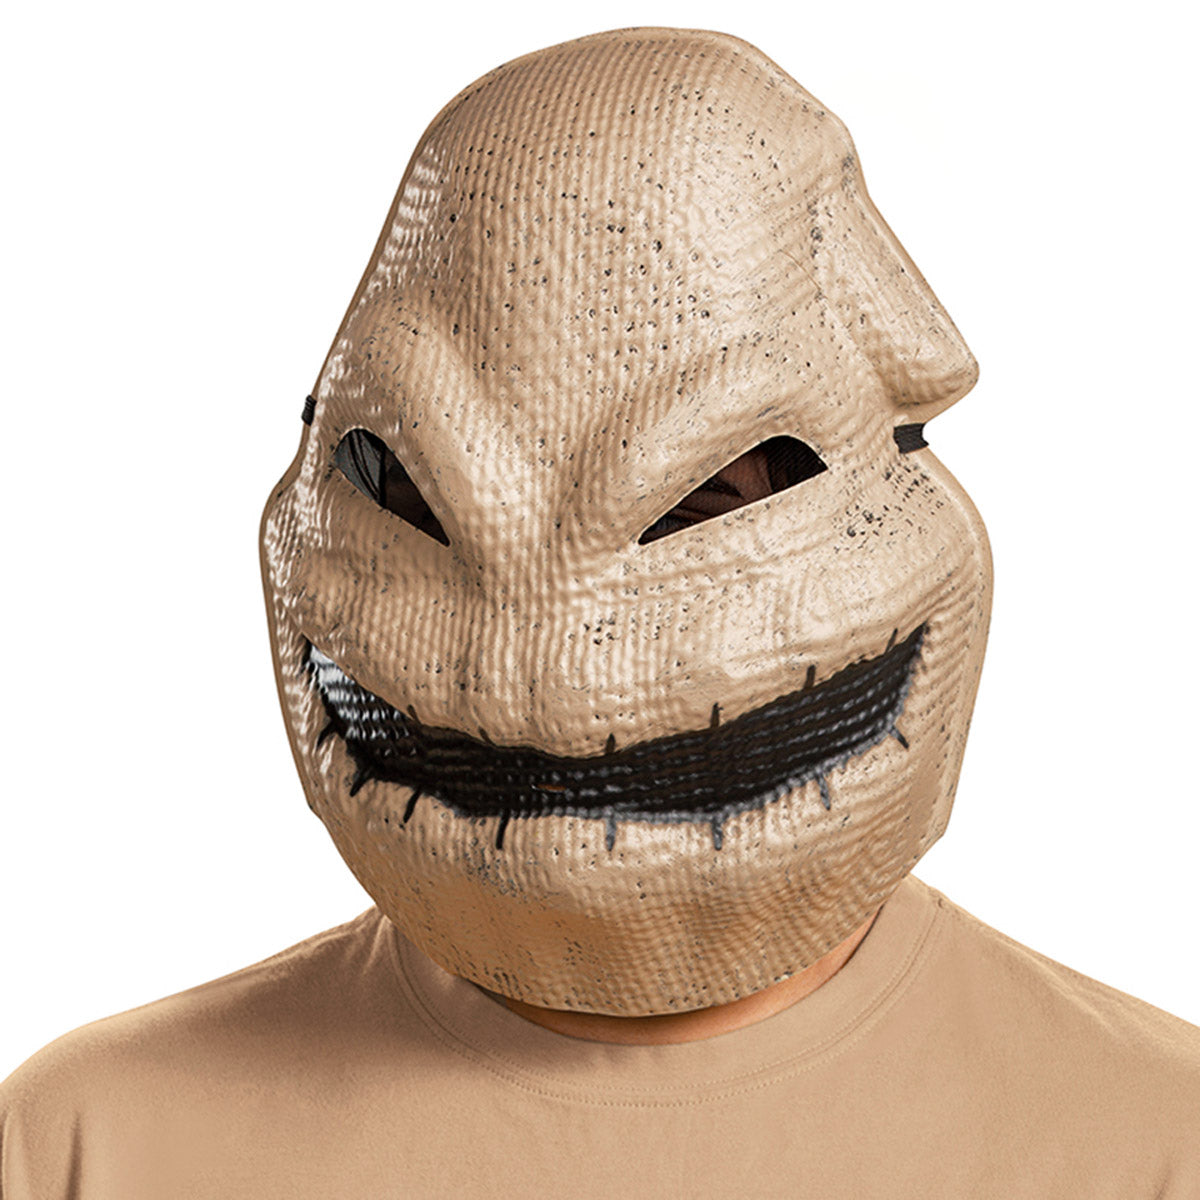 Oogie Boogie Vacuform Mask Disguise 106699